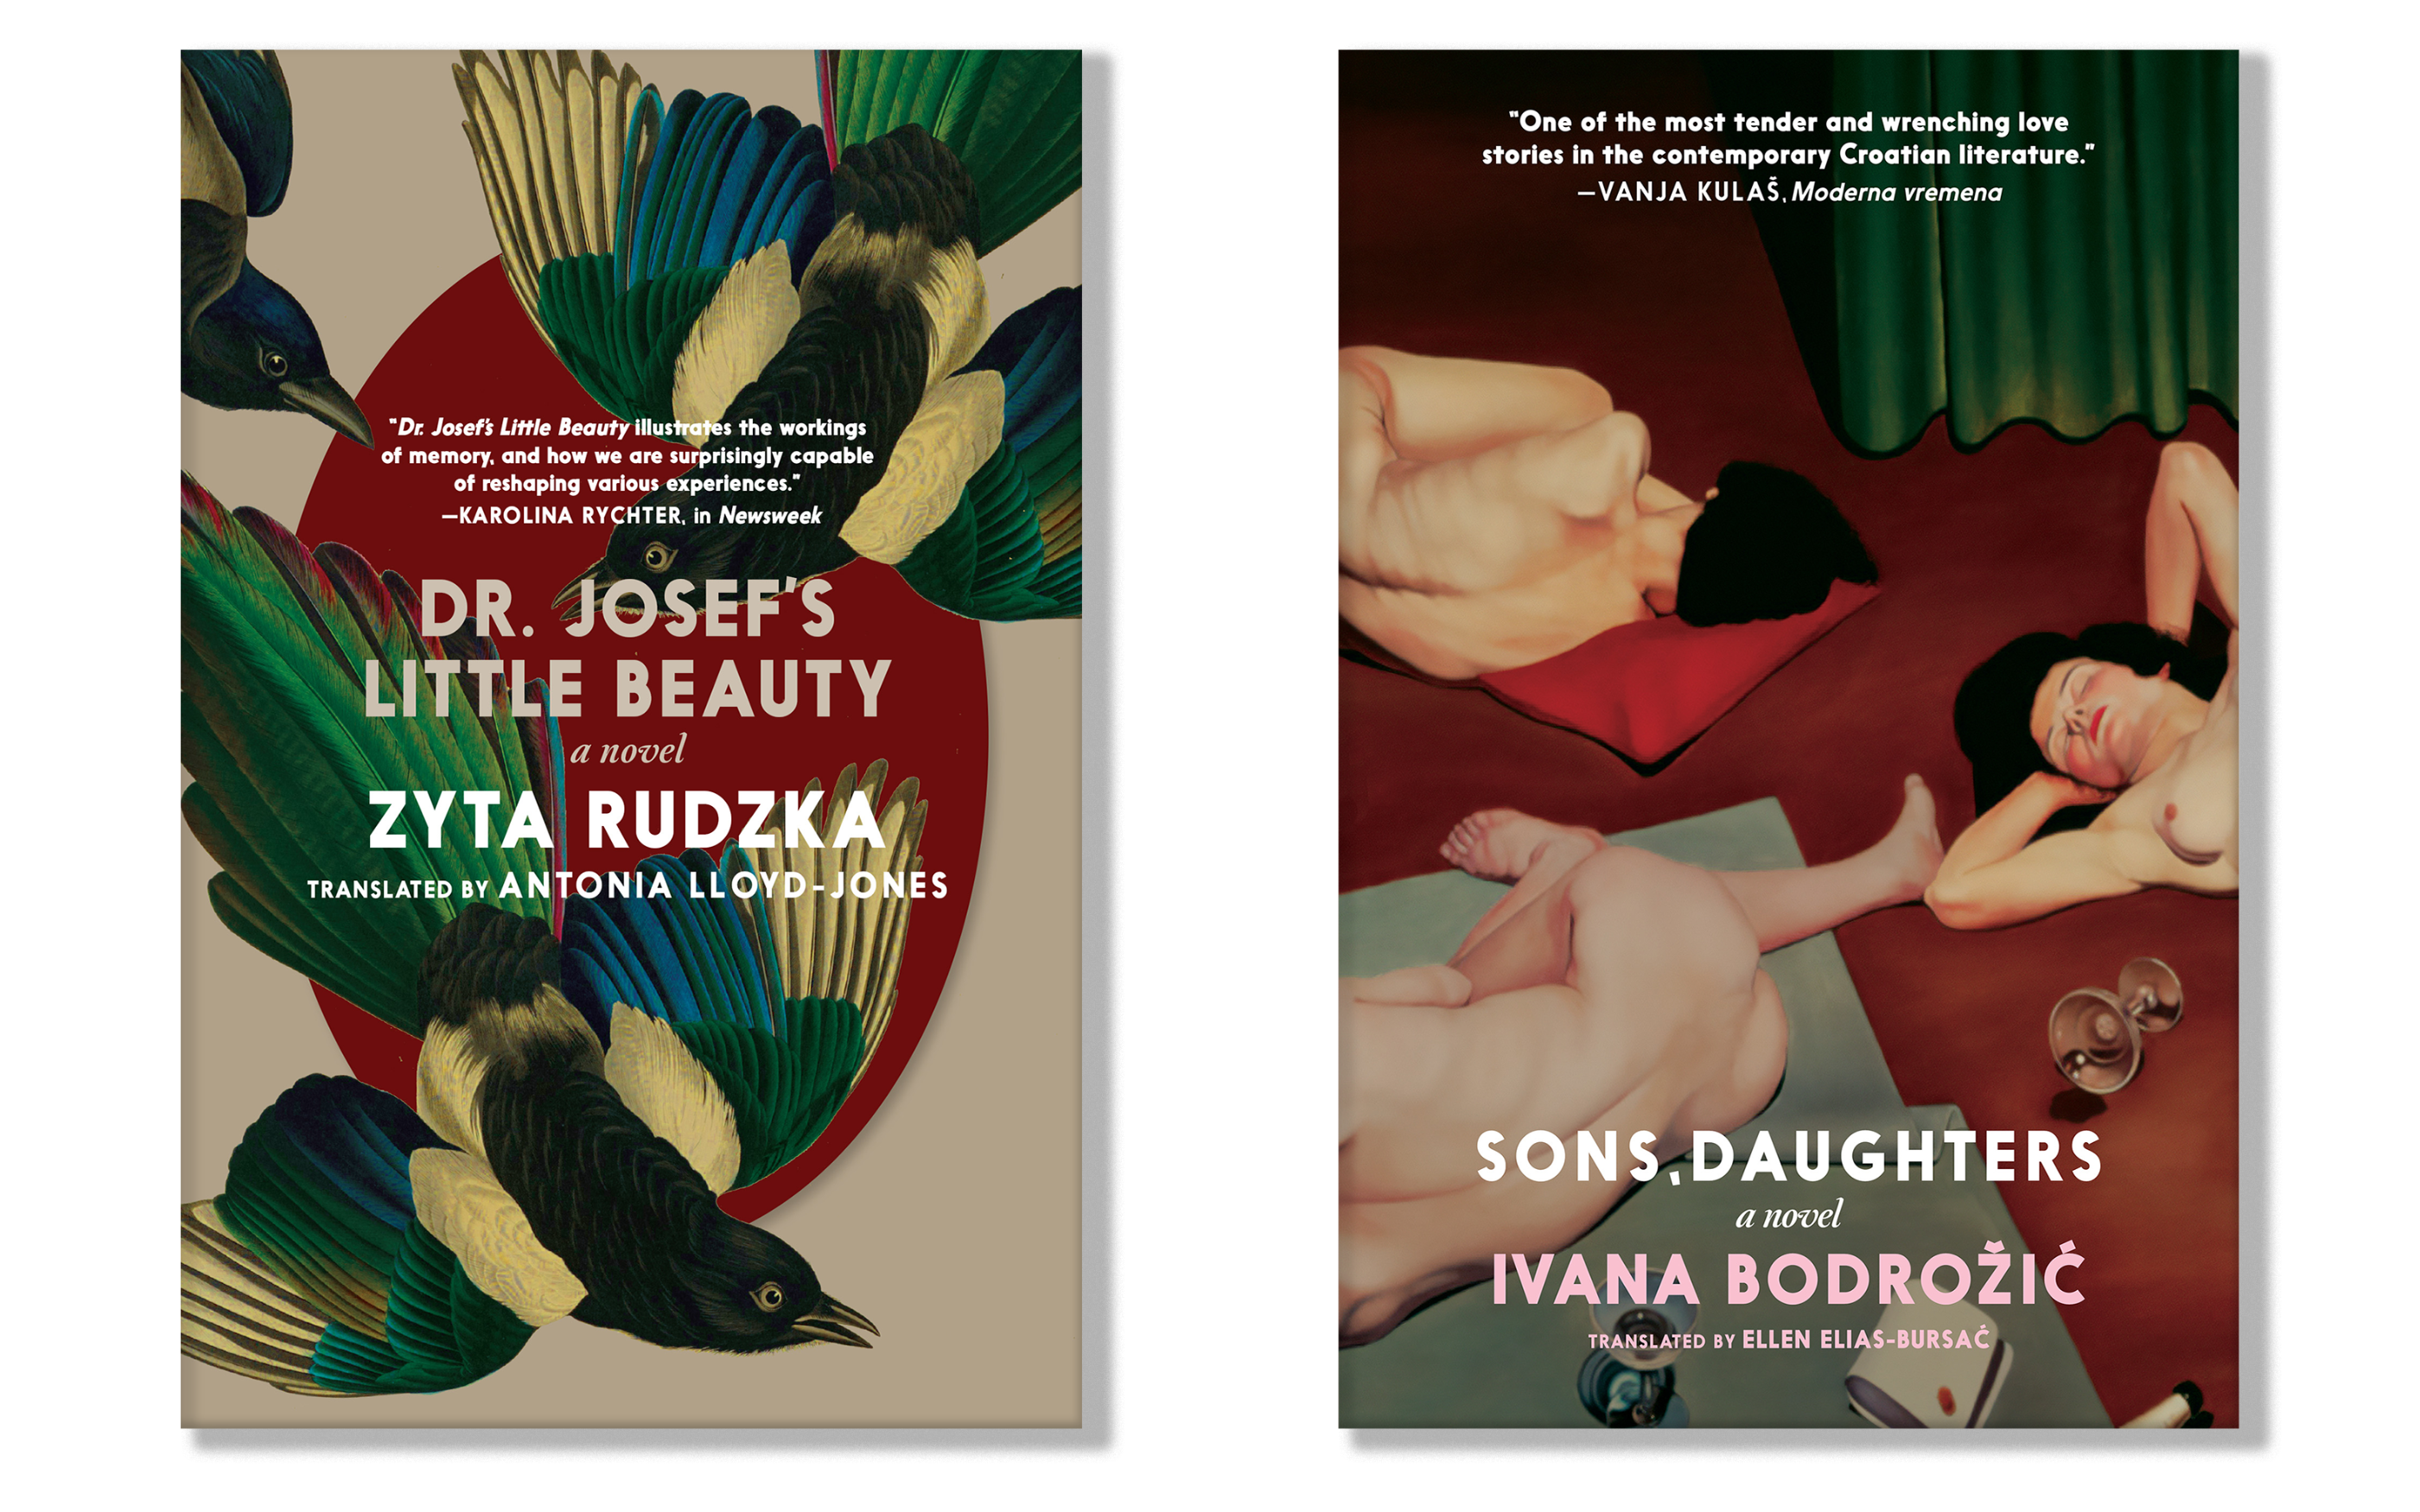 Covers of “Dr. Josef’s Little Beauty” and “Sons, Daughters”